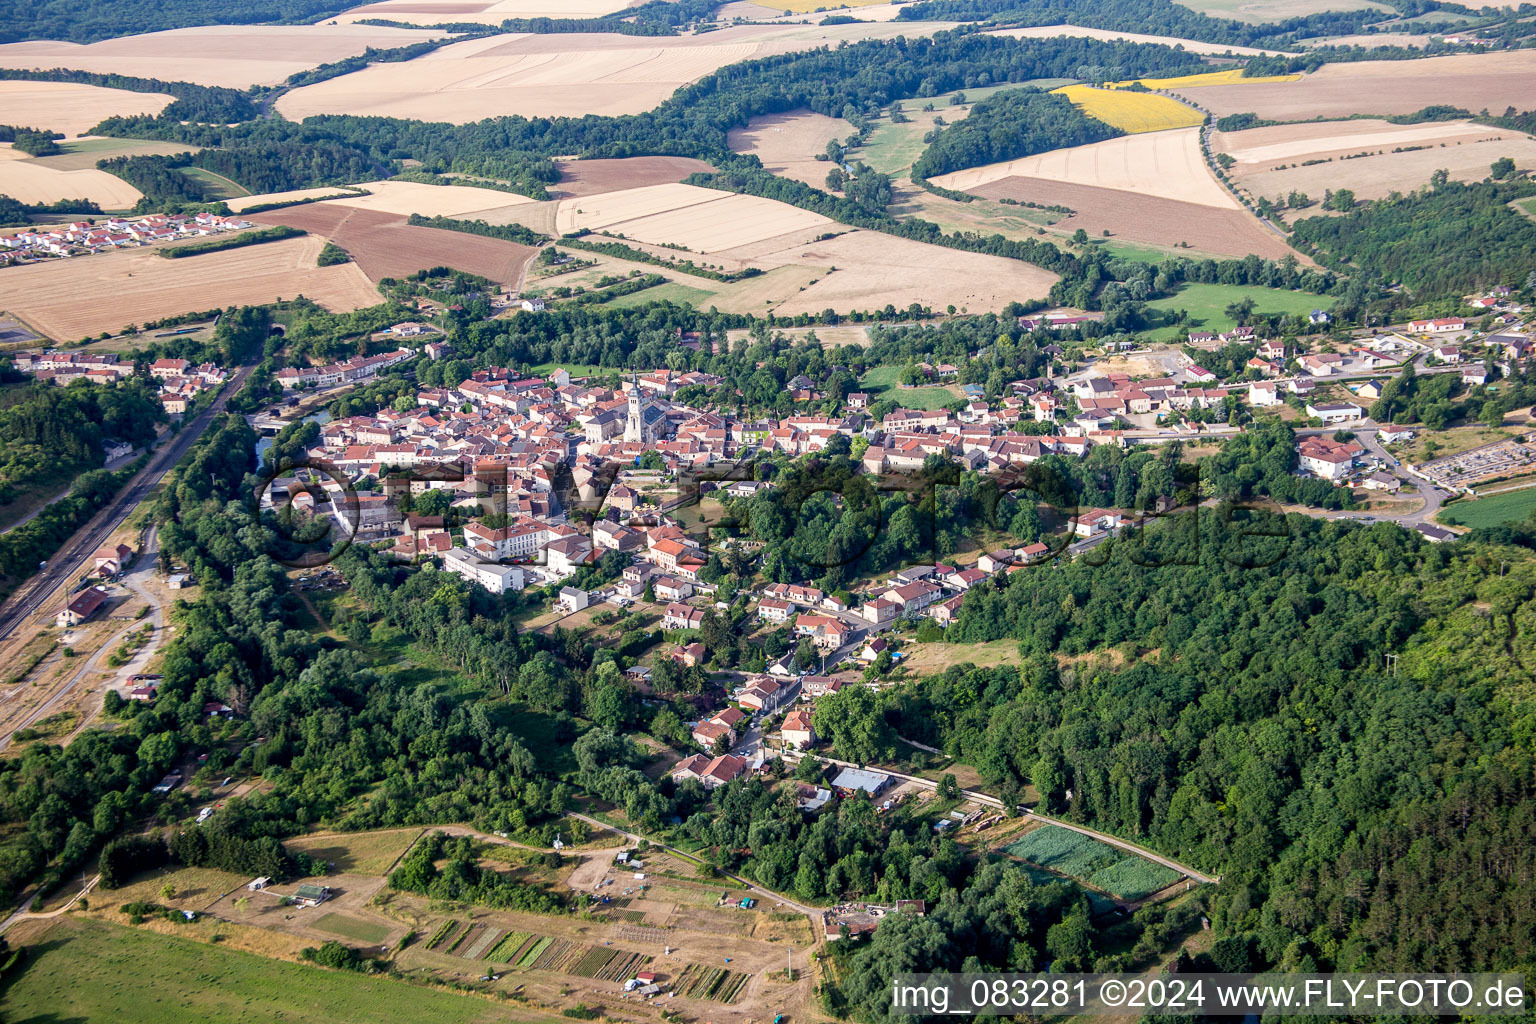 Aerial photograpy of Village view in Thiaucourt-Regnieville in Grand Est, France